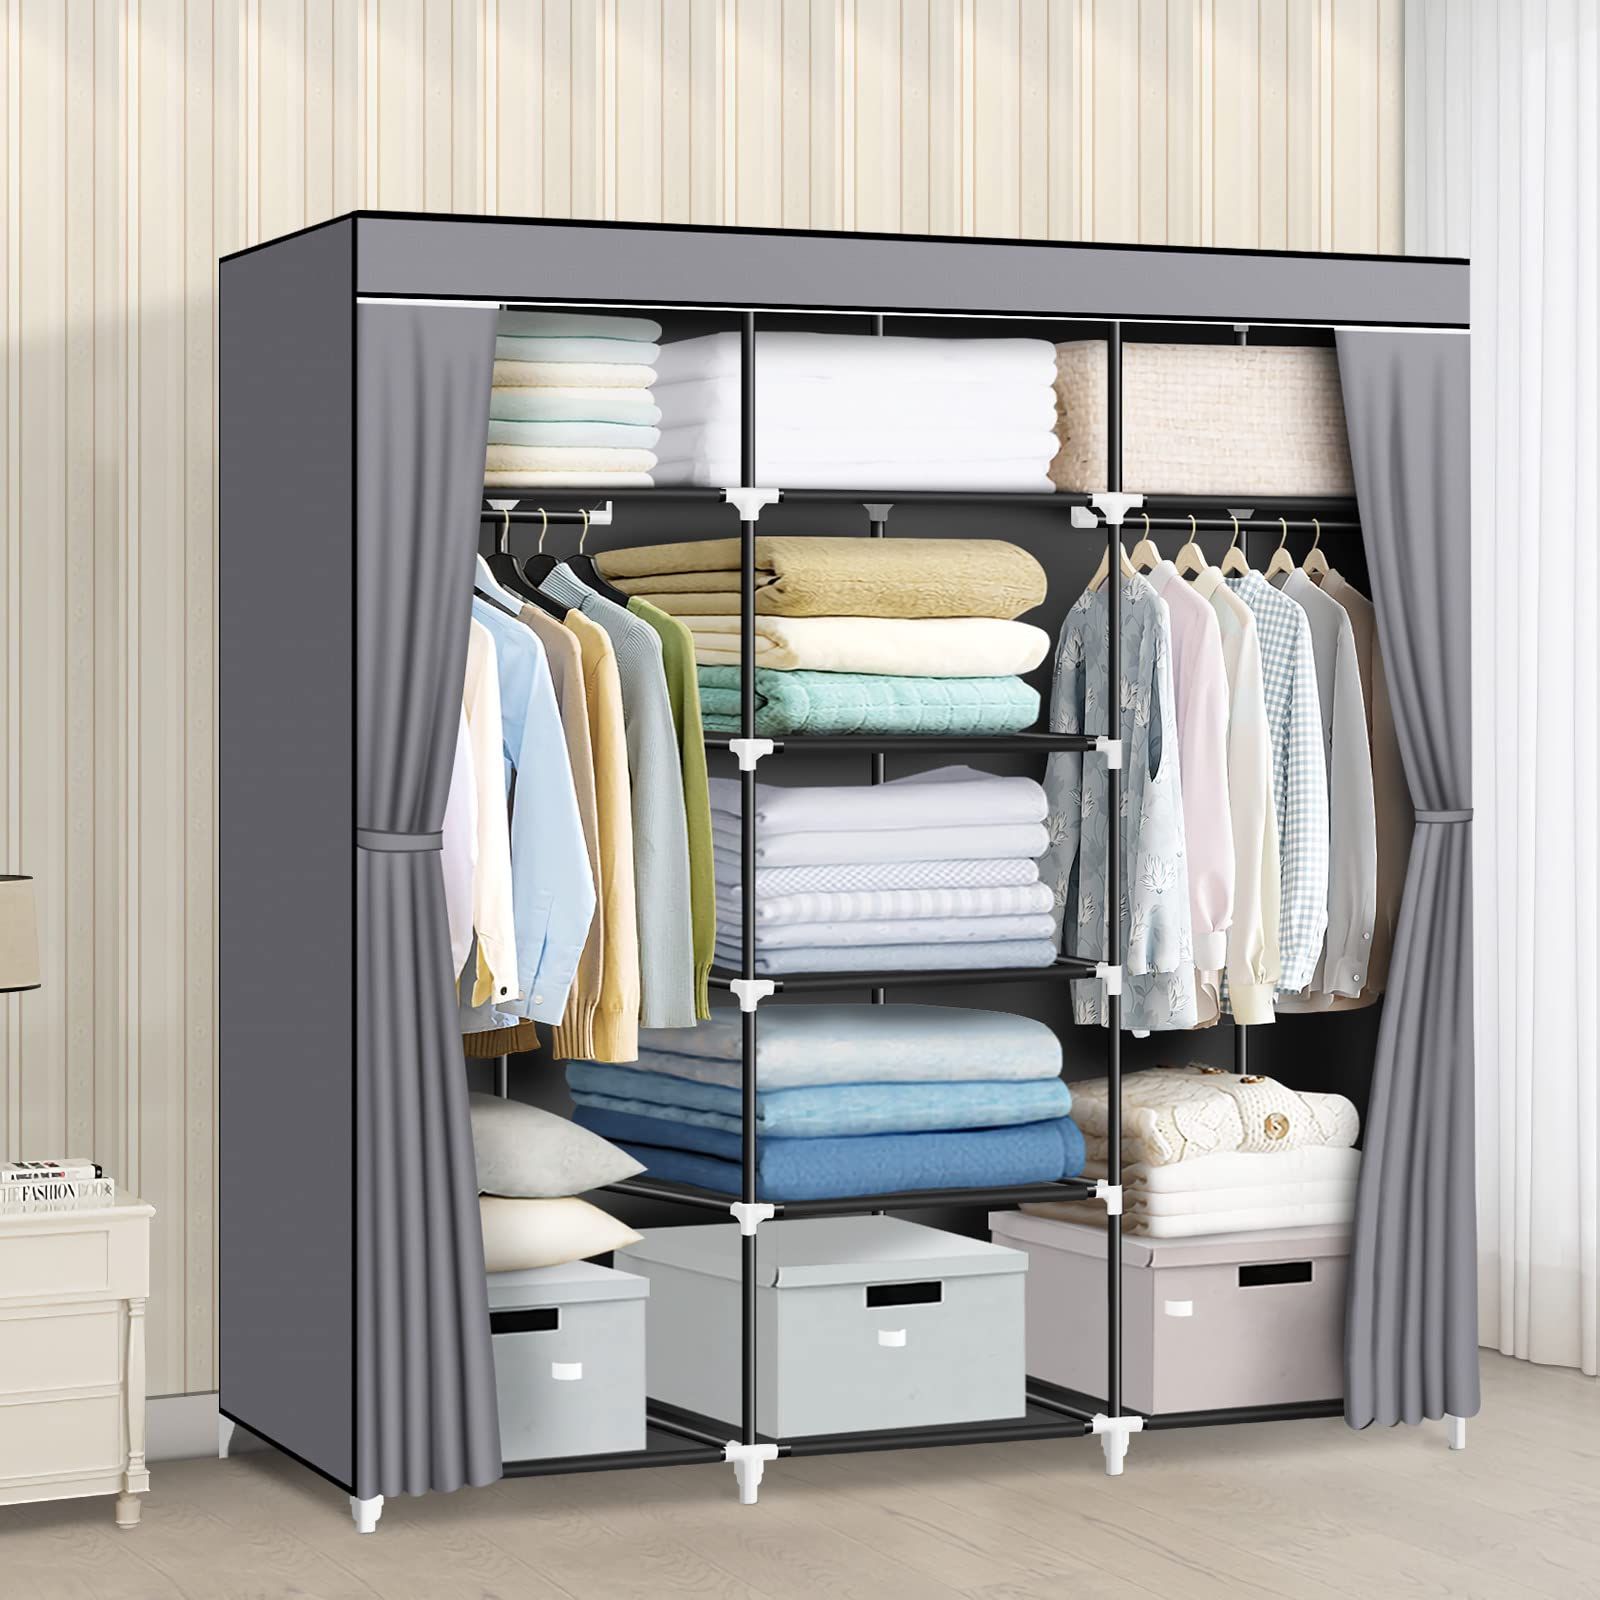 Preferred Amazon: Lokeme Portable Closet, 55.5 Inch Wardrobe Closet For Hanging  Clothes With 2 Hanging Rods, 9 Clothes Storage Organizer Shelves, Gray  Closet Extra Durable, Quick And Easy To Assemble : Home & Kitchen Regarding Wardrobes With Shelf Portable Closet (Photo 2 of 10)